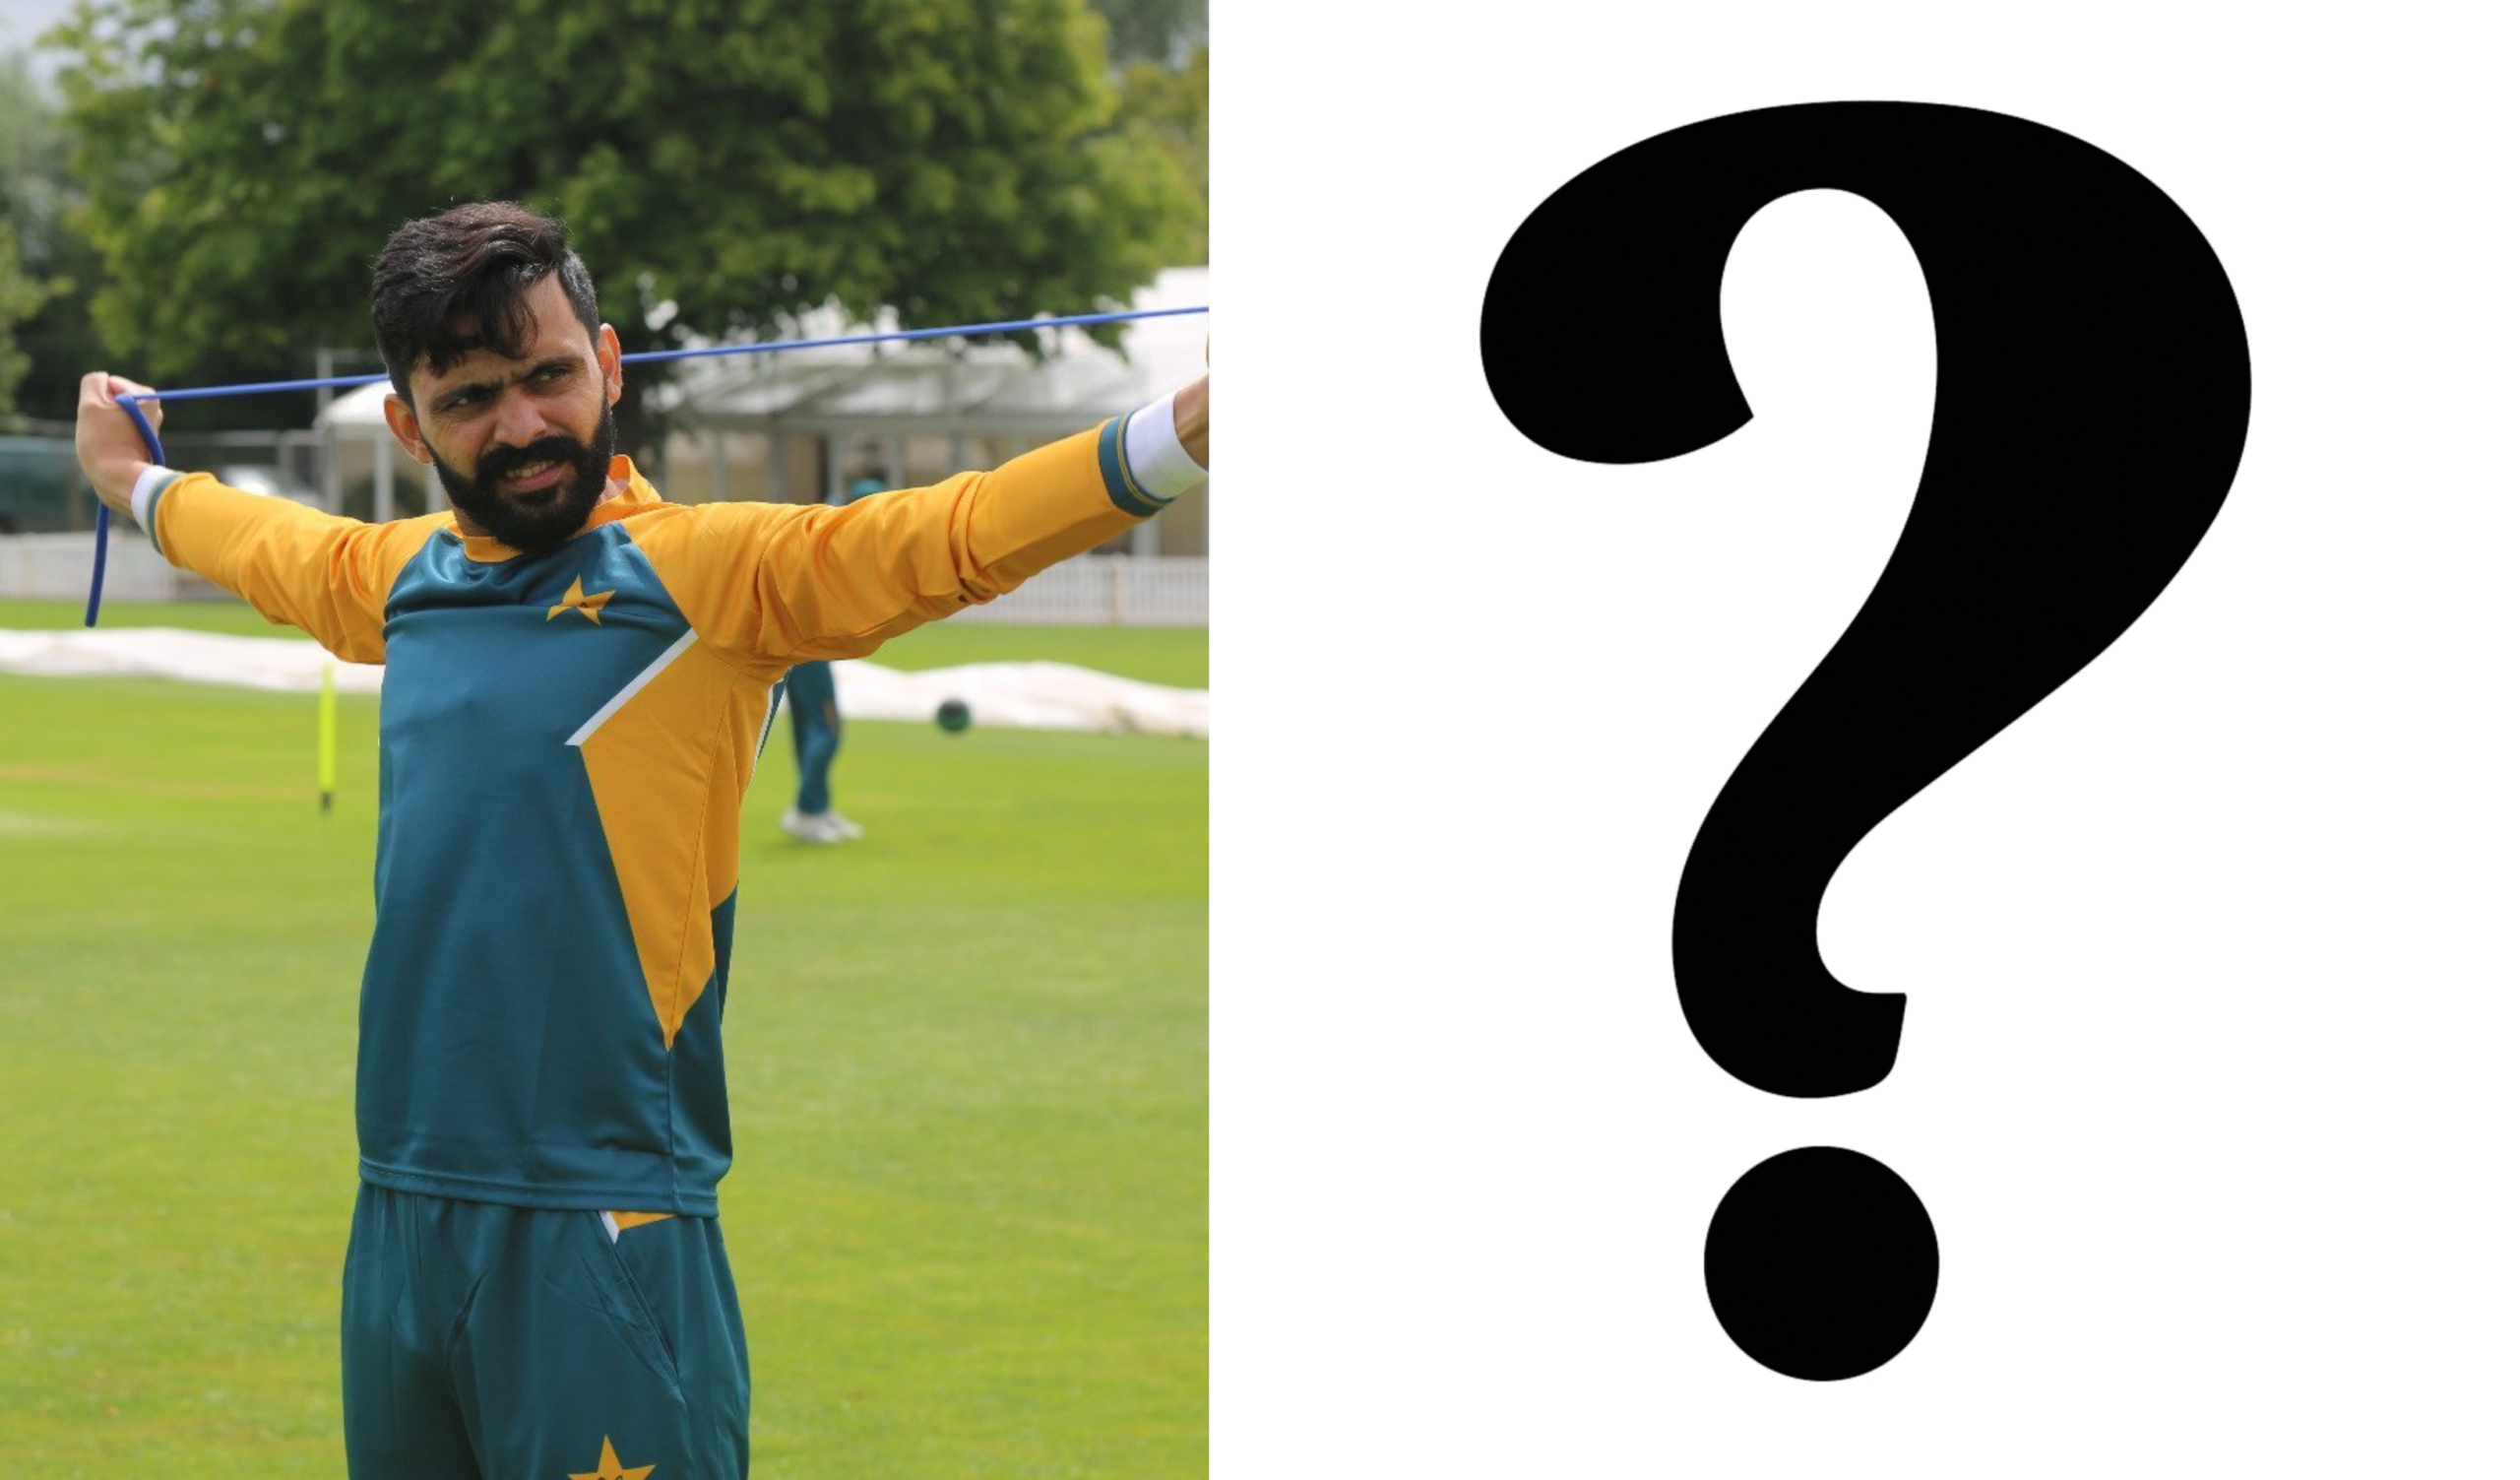 Who is to miss his place in the second test as Fawad Alam is likely to bat at 6? Image: CricTribune